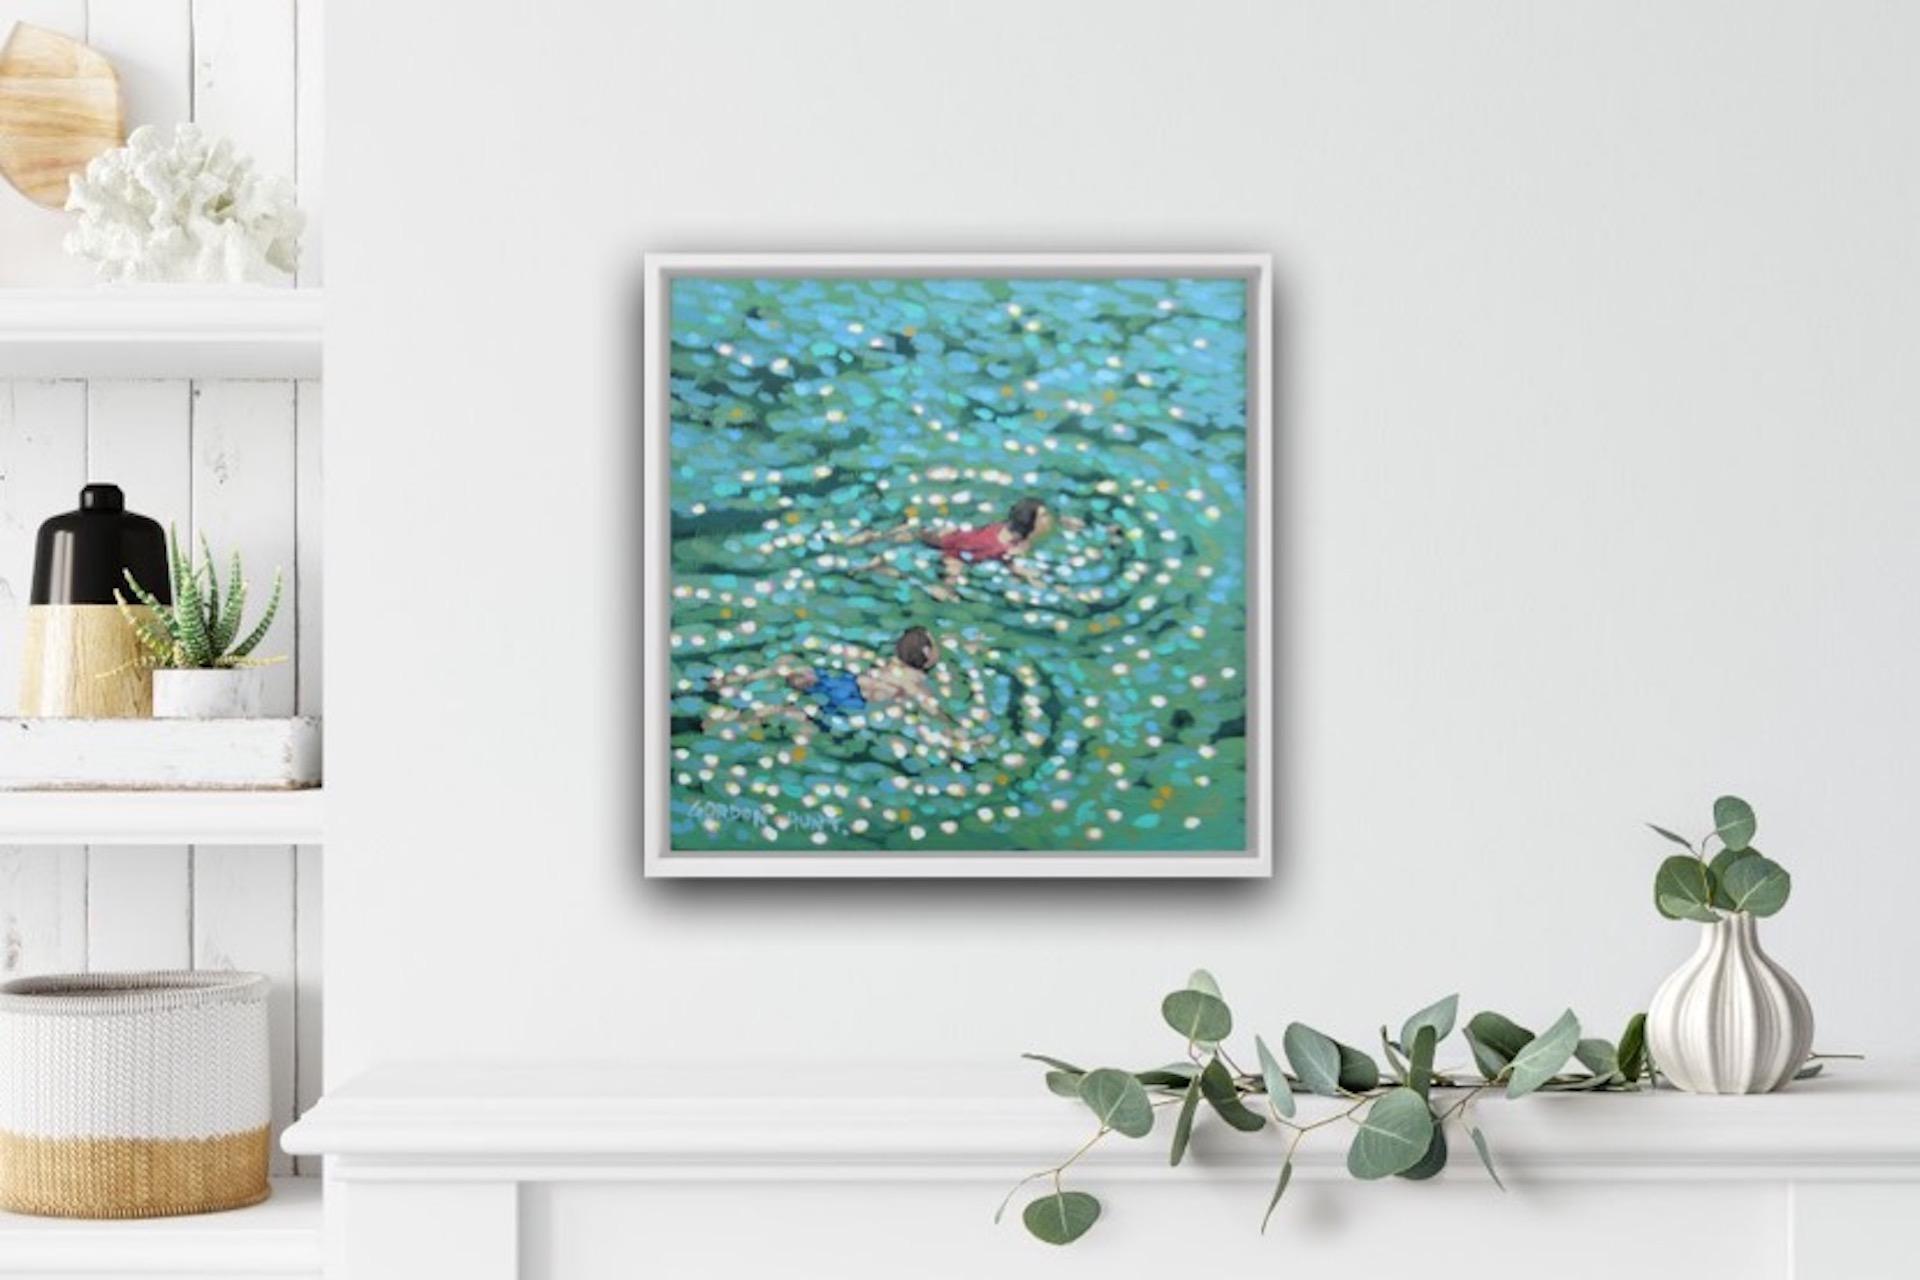 Gordon Hunt
In the swim
Original Oil Painting
Oil Paint on Belgium linen
Size: H 30cm x W 30cm x D 4cm
Sold Unframed
Please note that in situ images are purely an indication of how a piece may look.

‘In the swim!’ is an original seascape painting